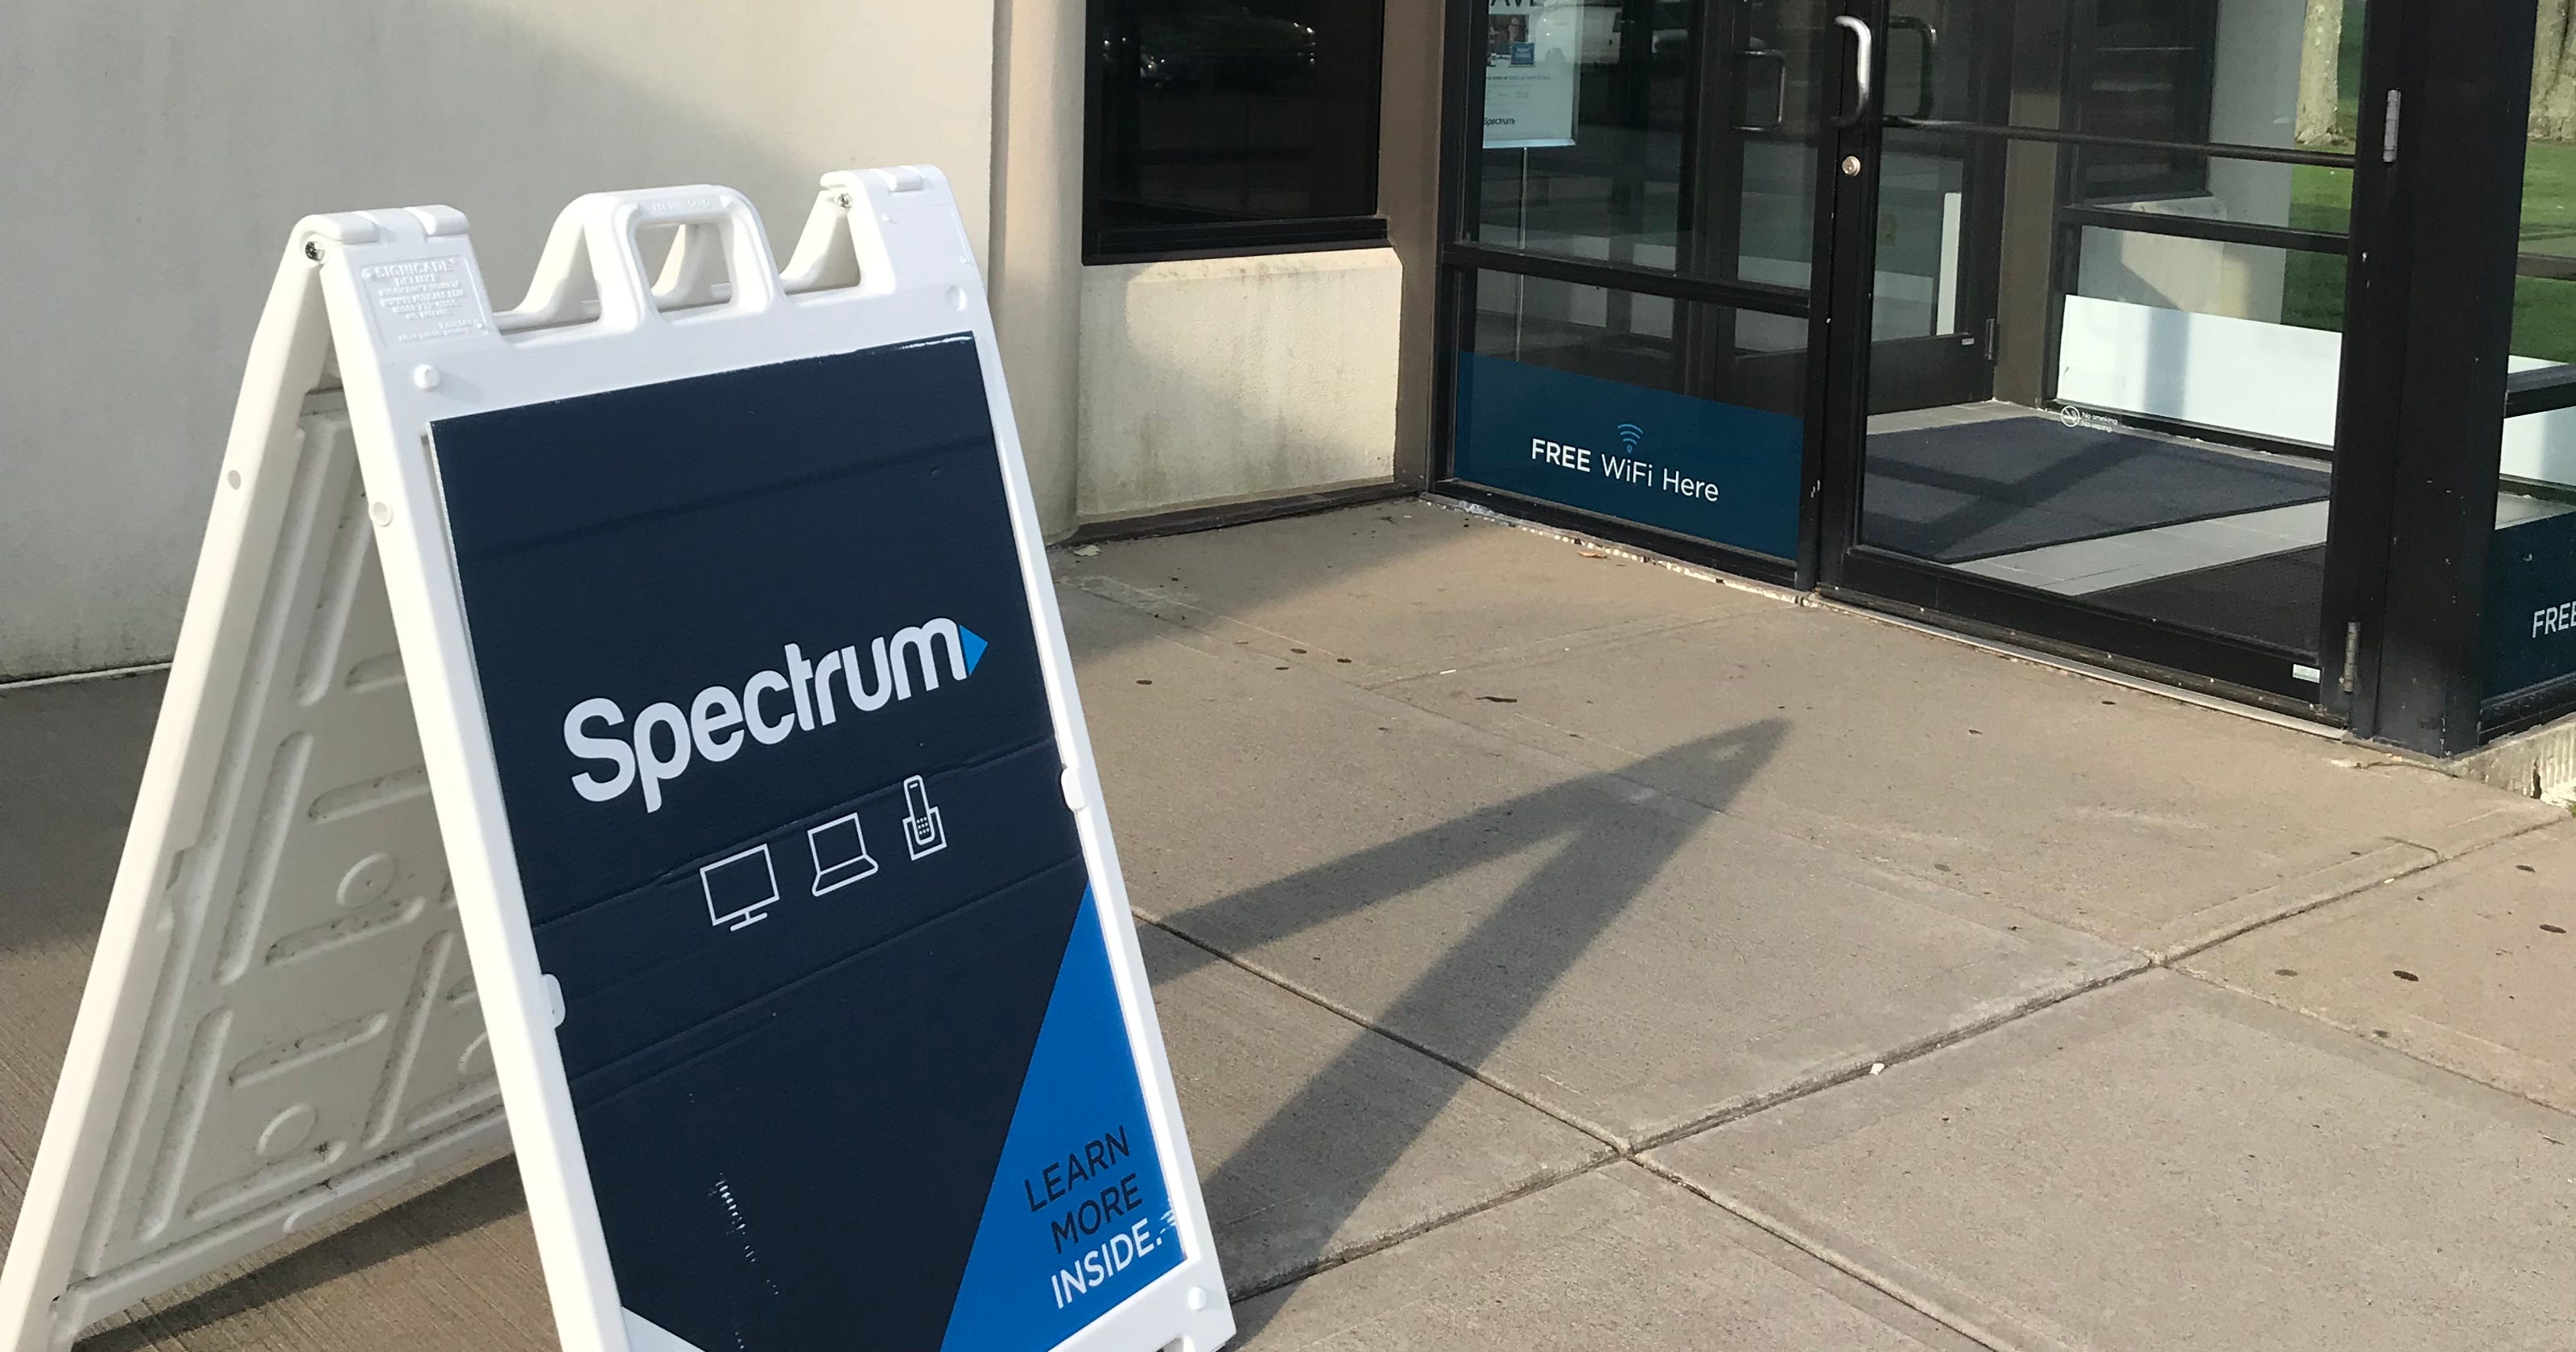 Charter's Spectrum cable system draws anger in New York